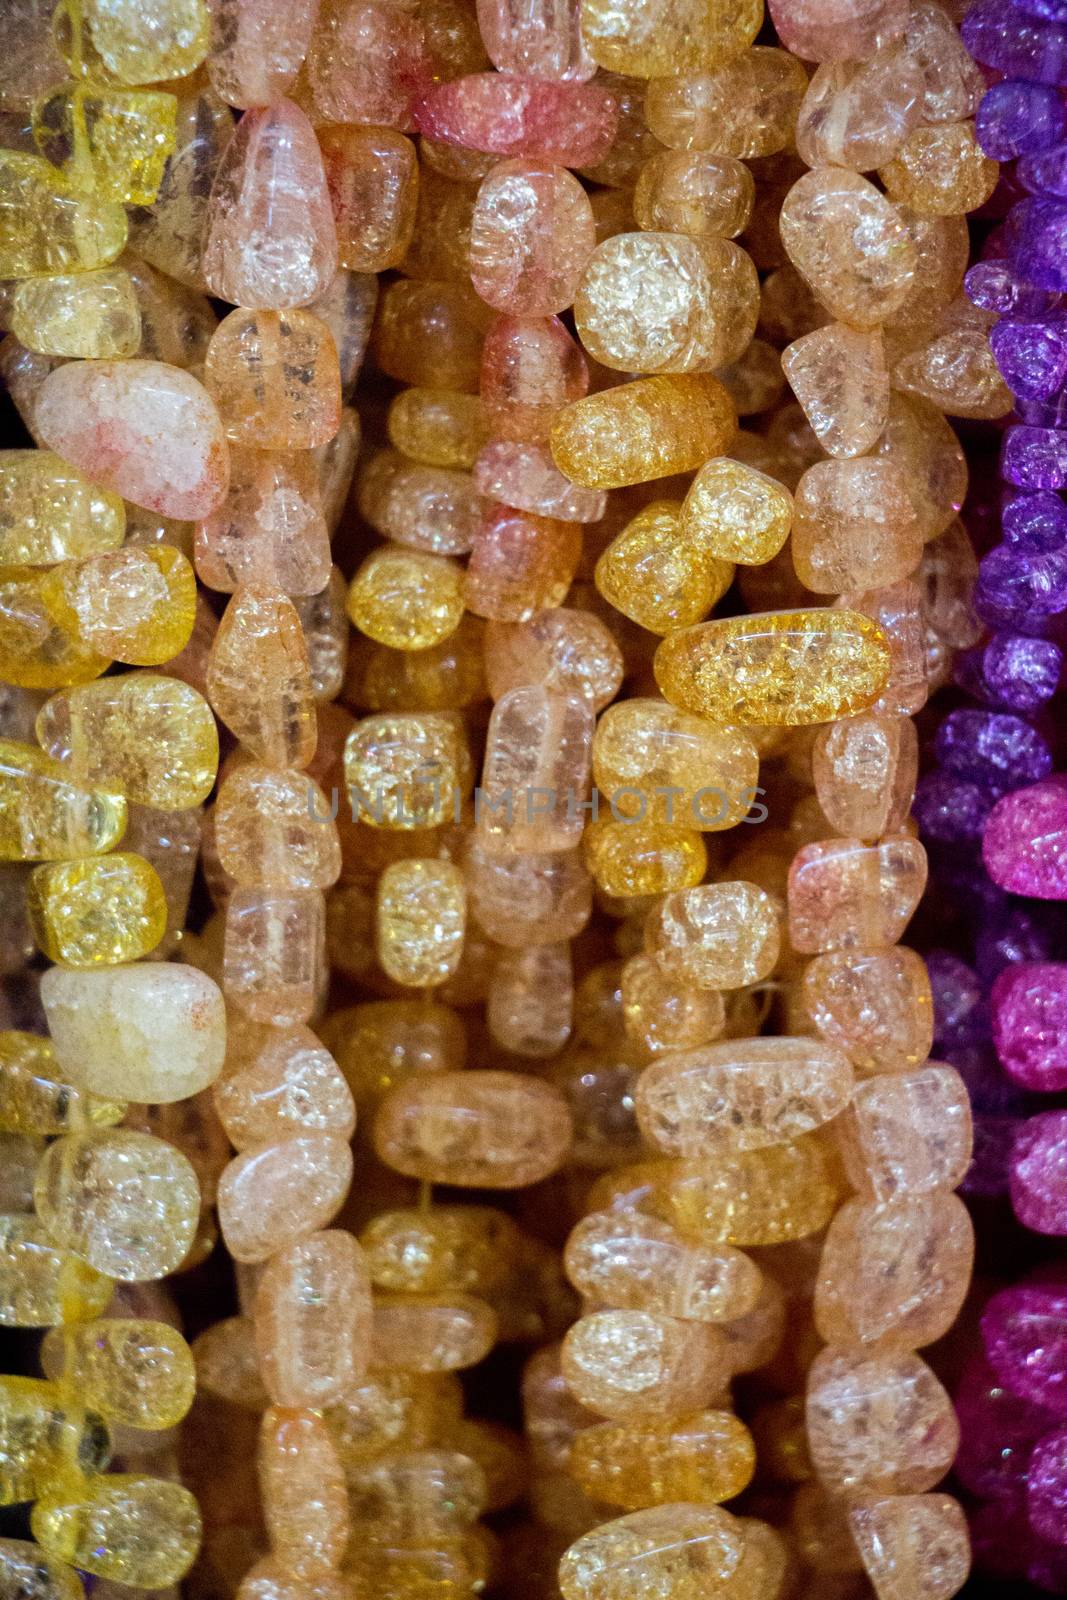 Colorful beads of various color